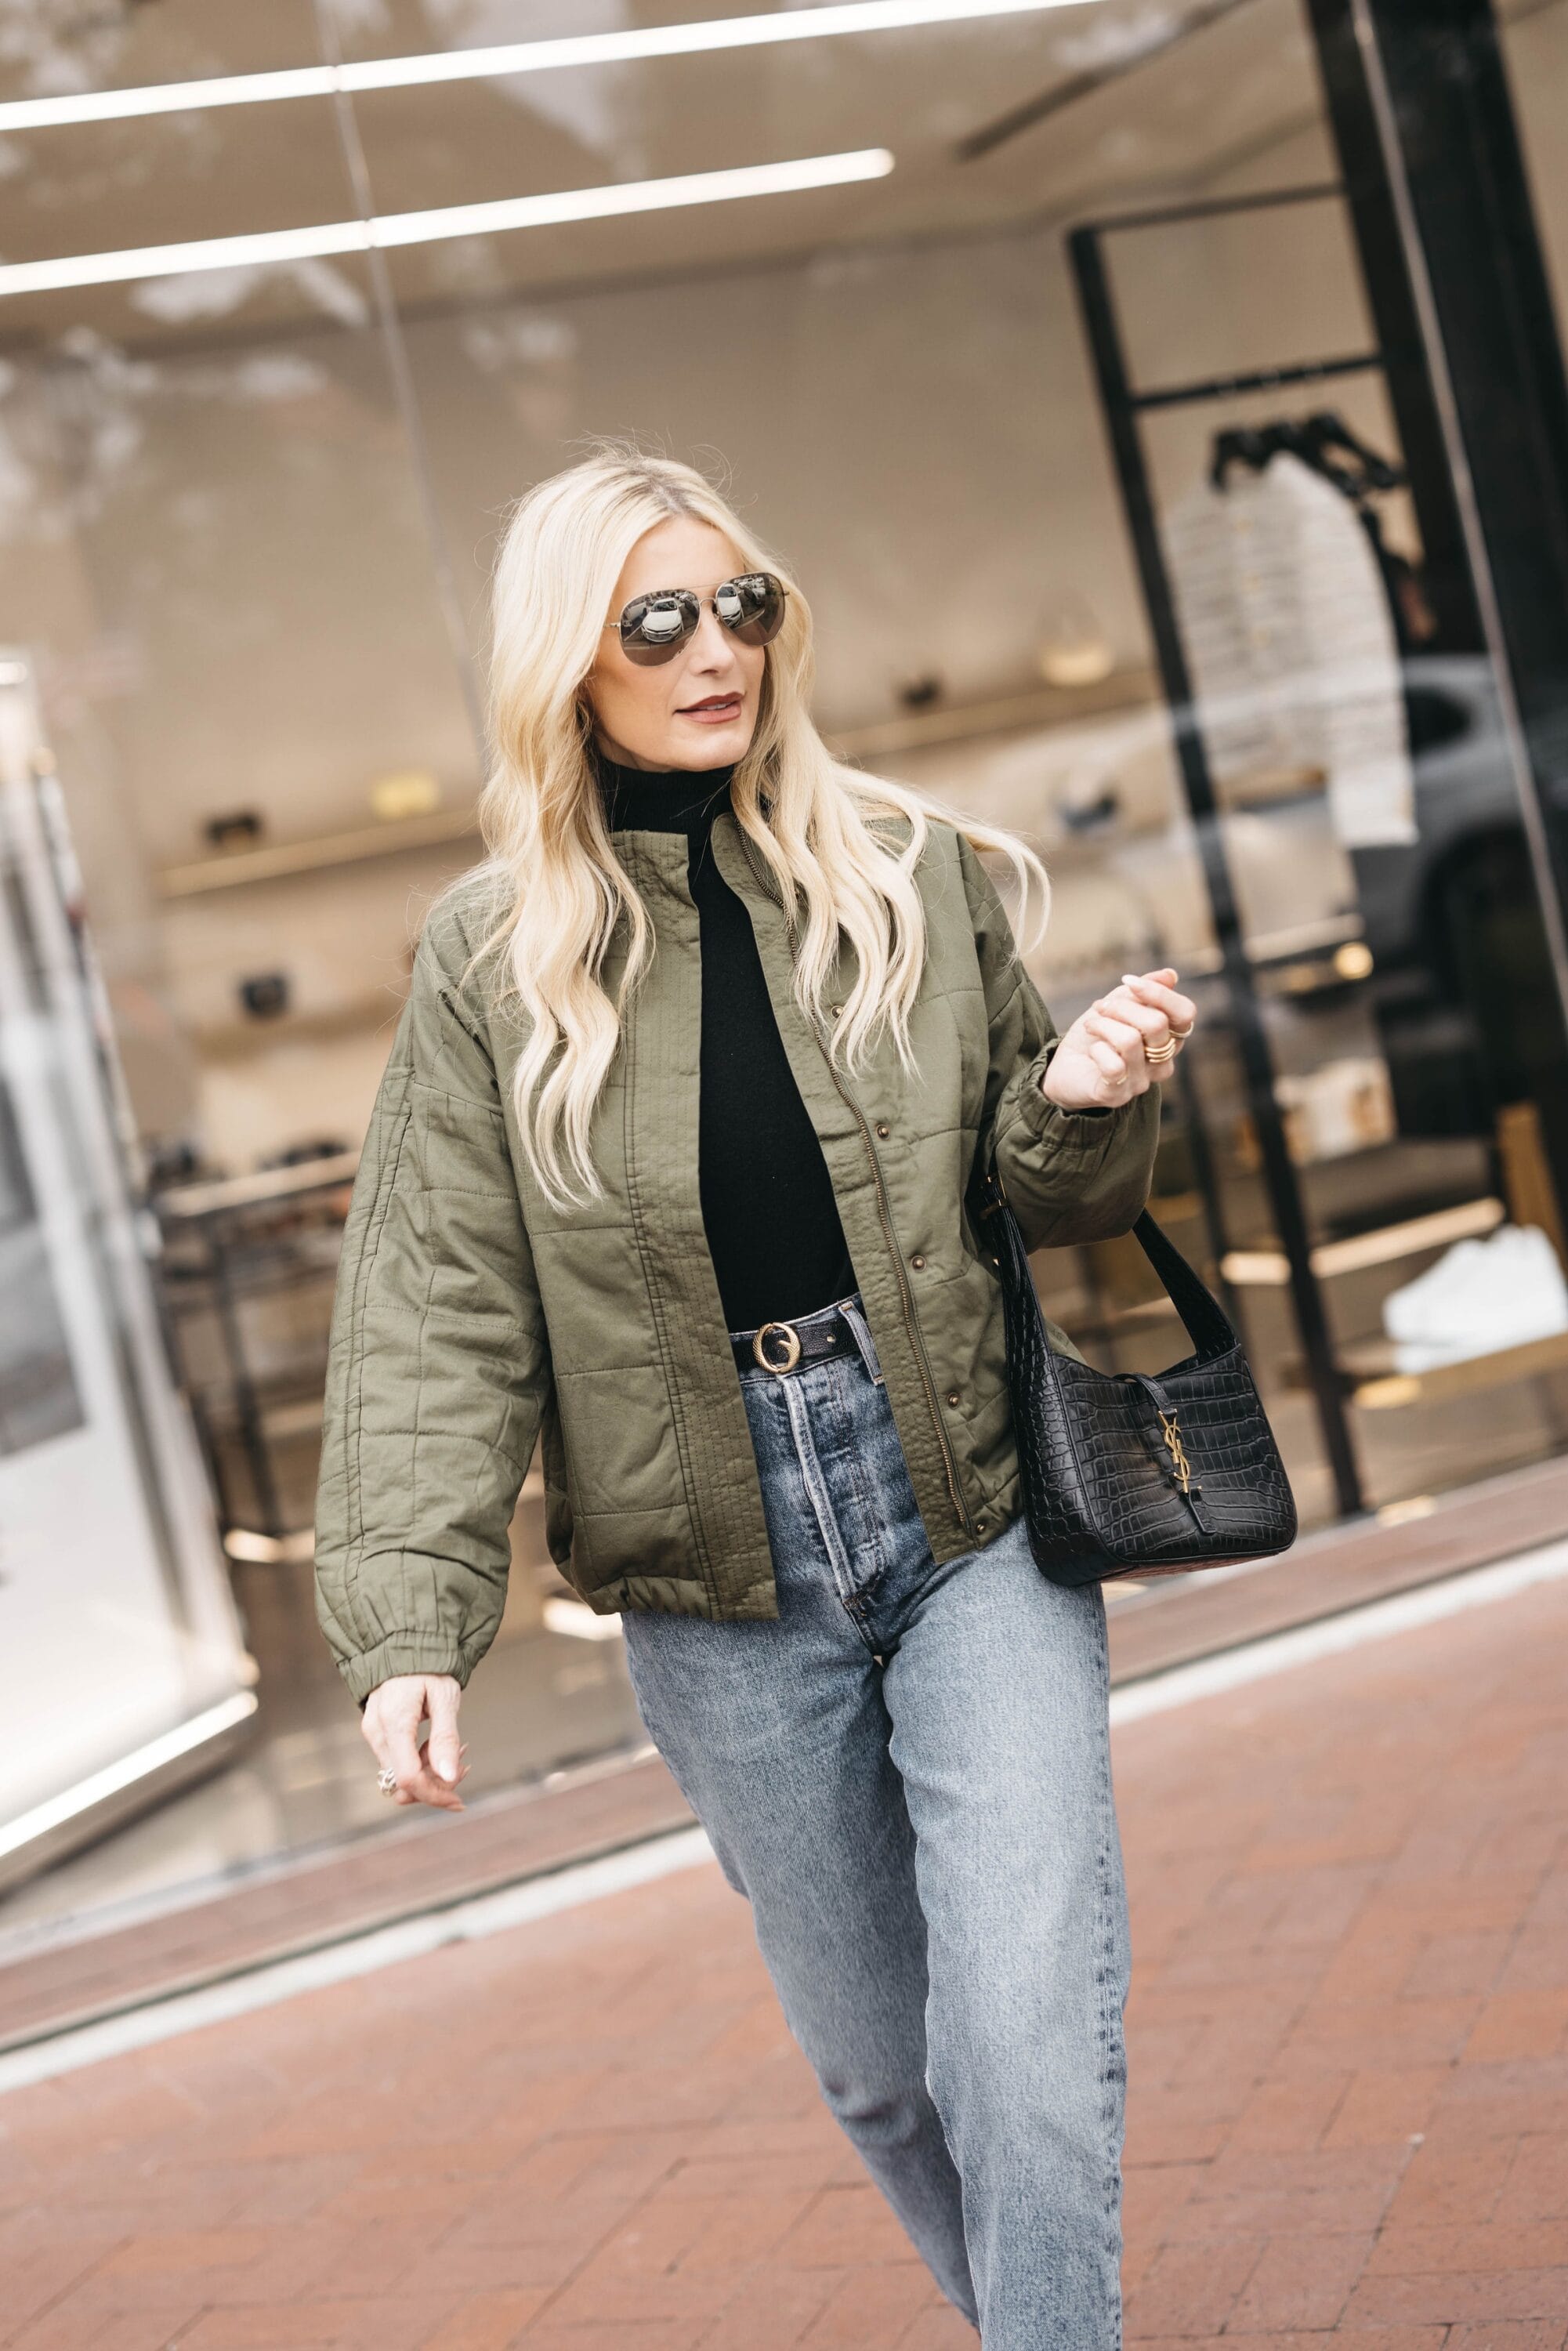 Over 40 fashion blogger from Dallas wearing Agolde 90's pinch waist jeans as one of the top denim trends of 2023 with green utility jacket and black mockneck top.